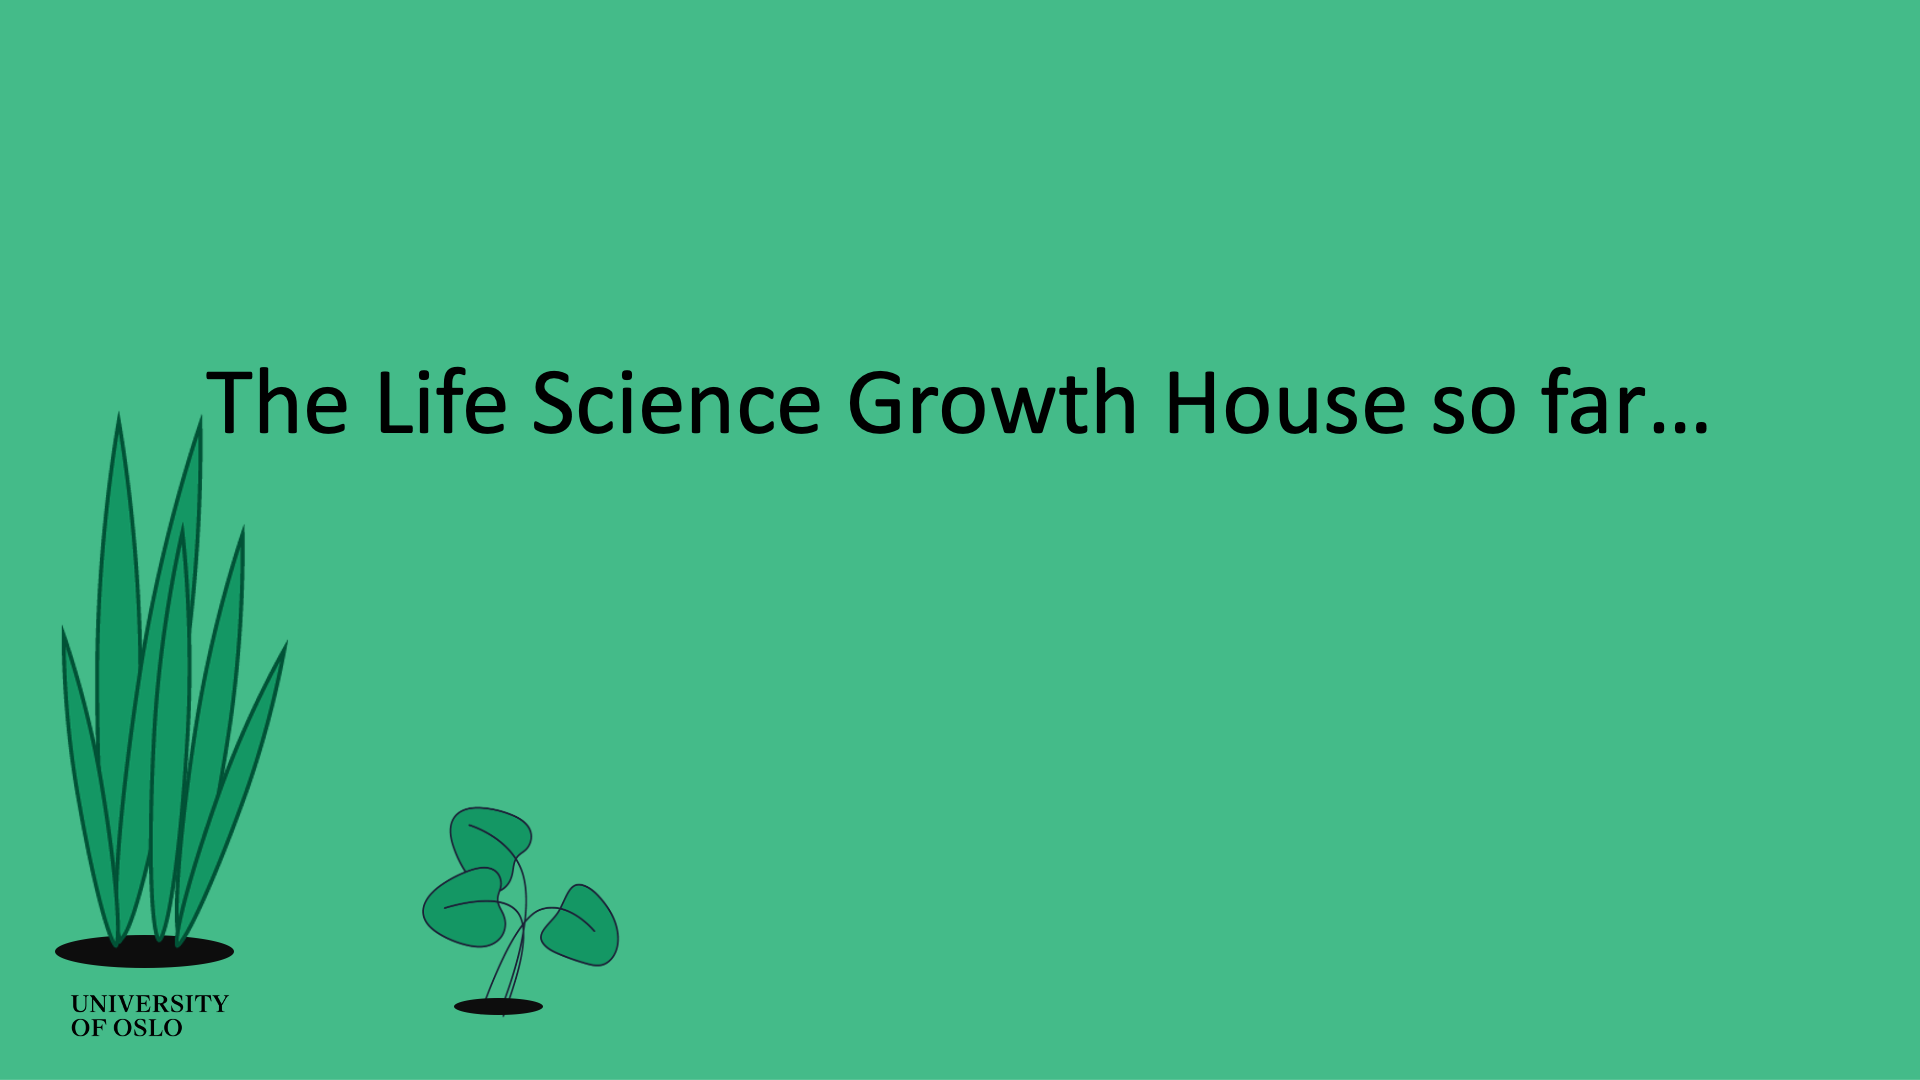 Illustration with text: The Life Science Growth House so far…